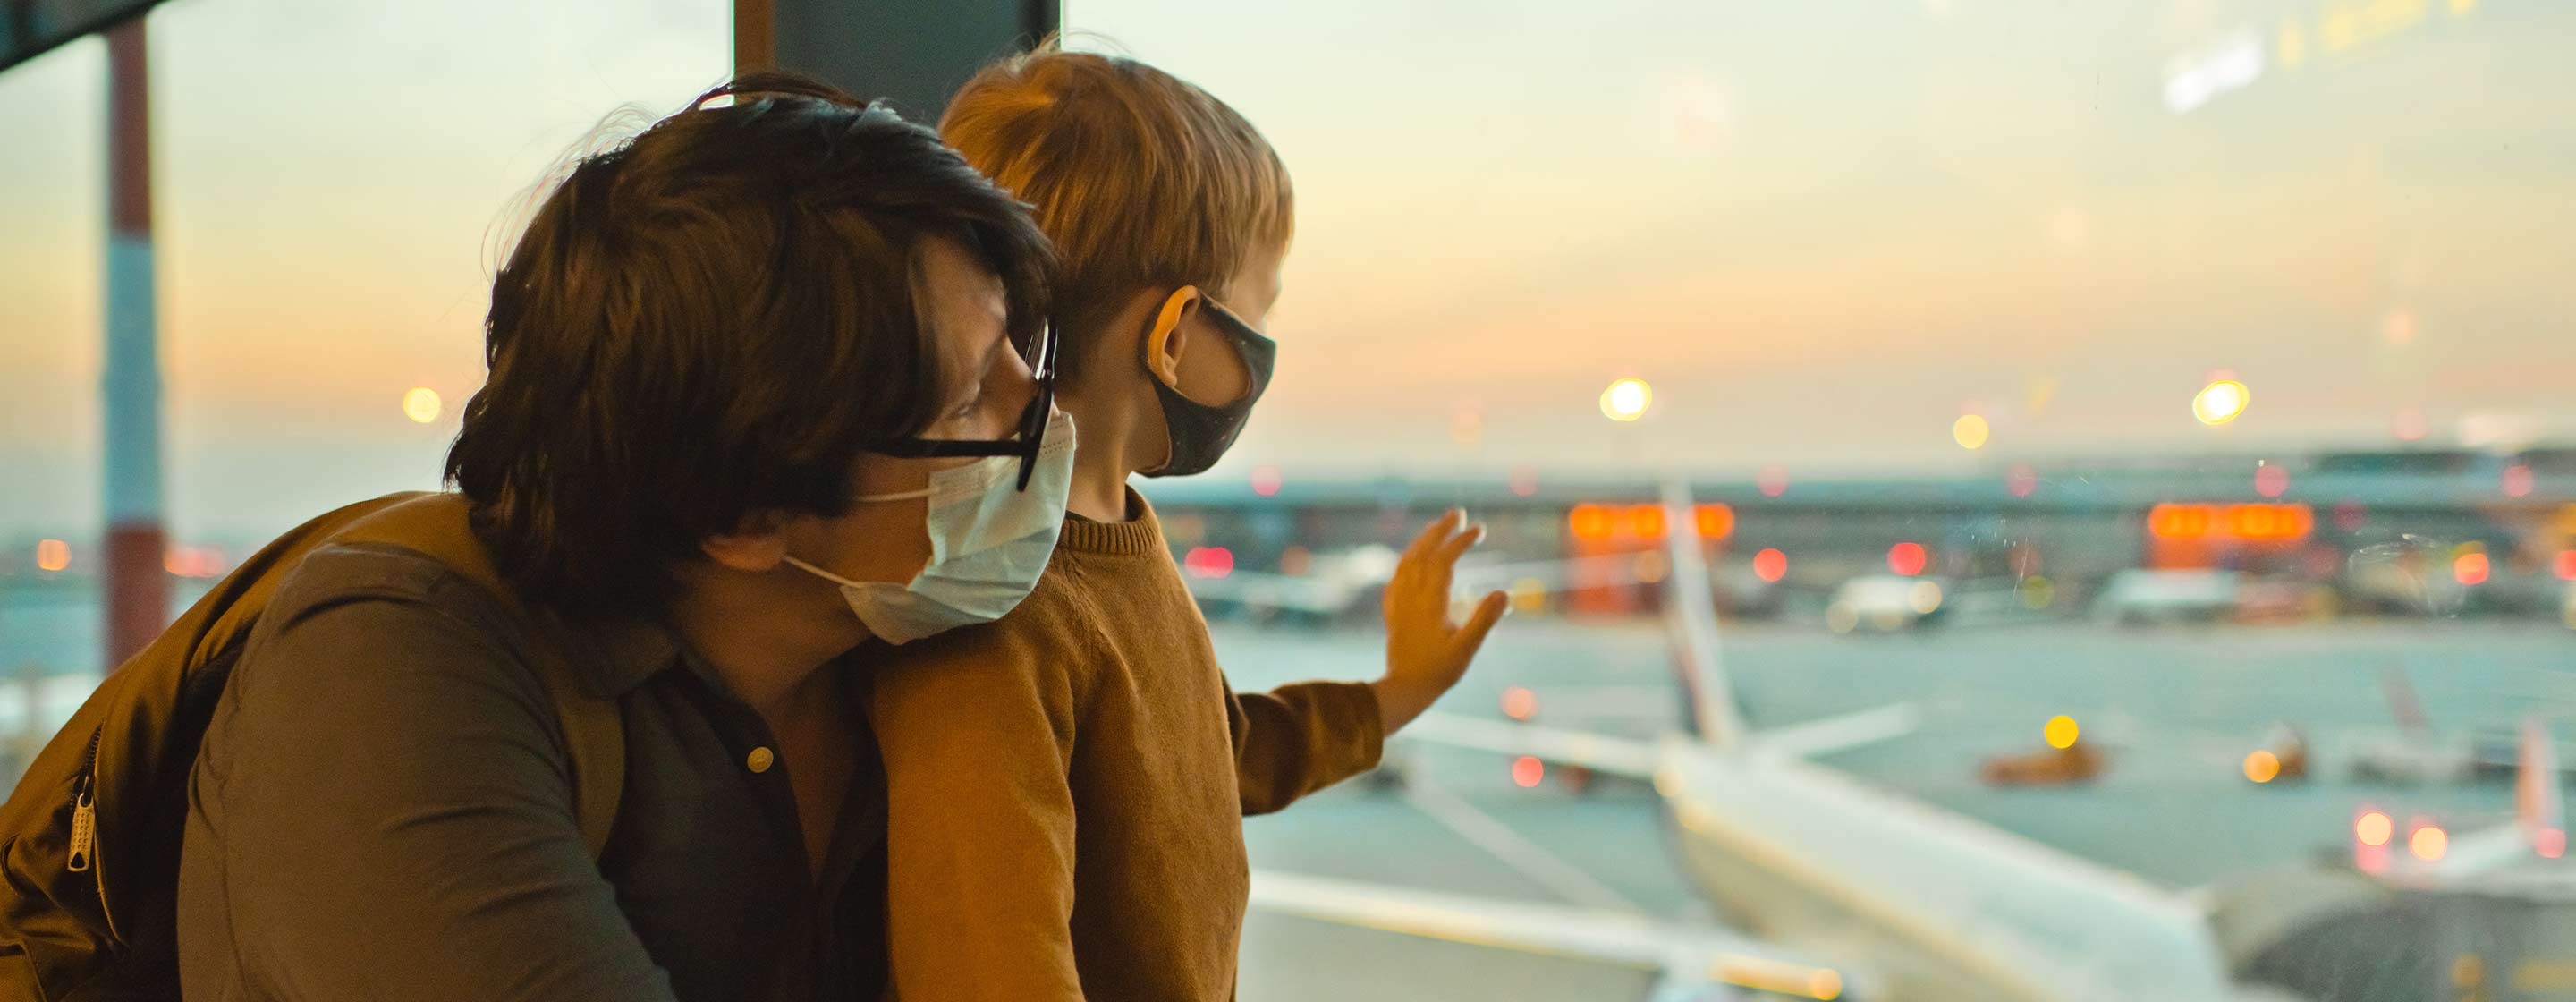 Family in protective face masks in airport during COVID-19 pandemic